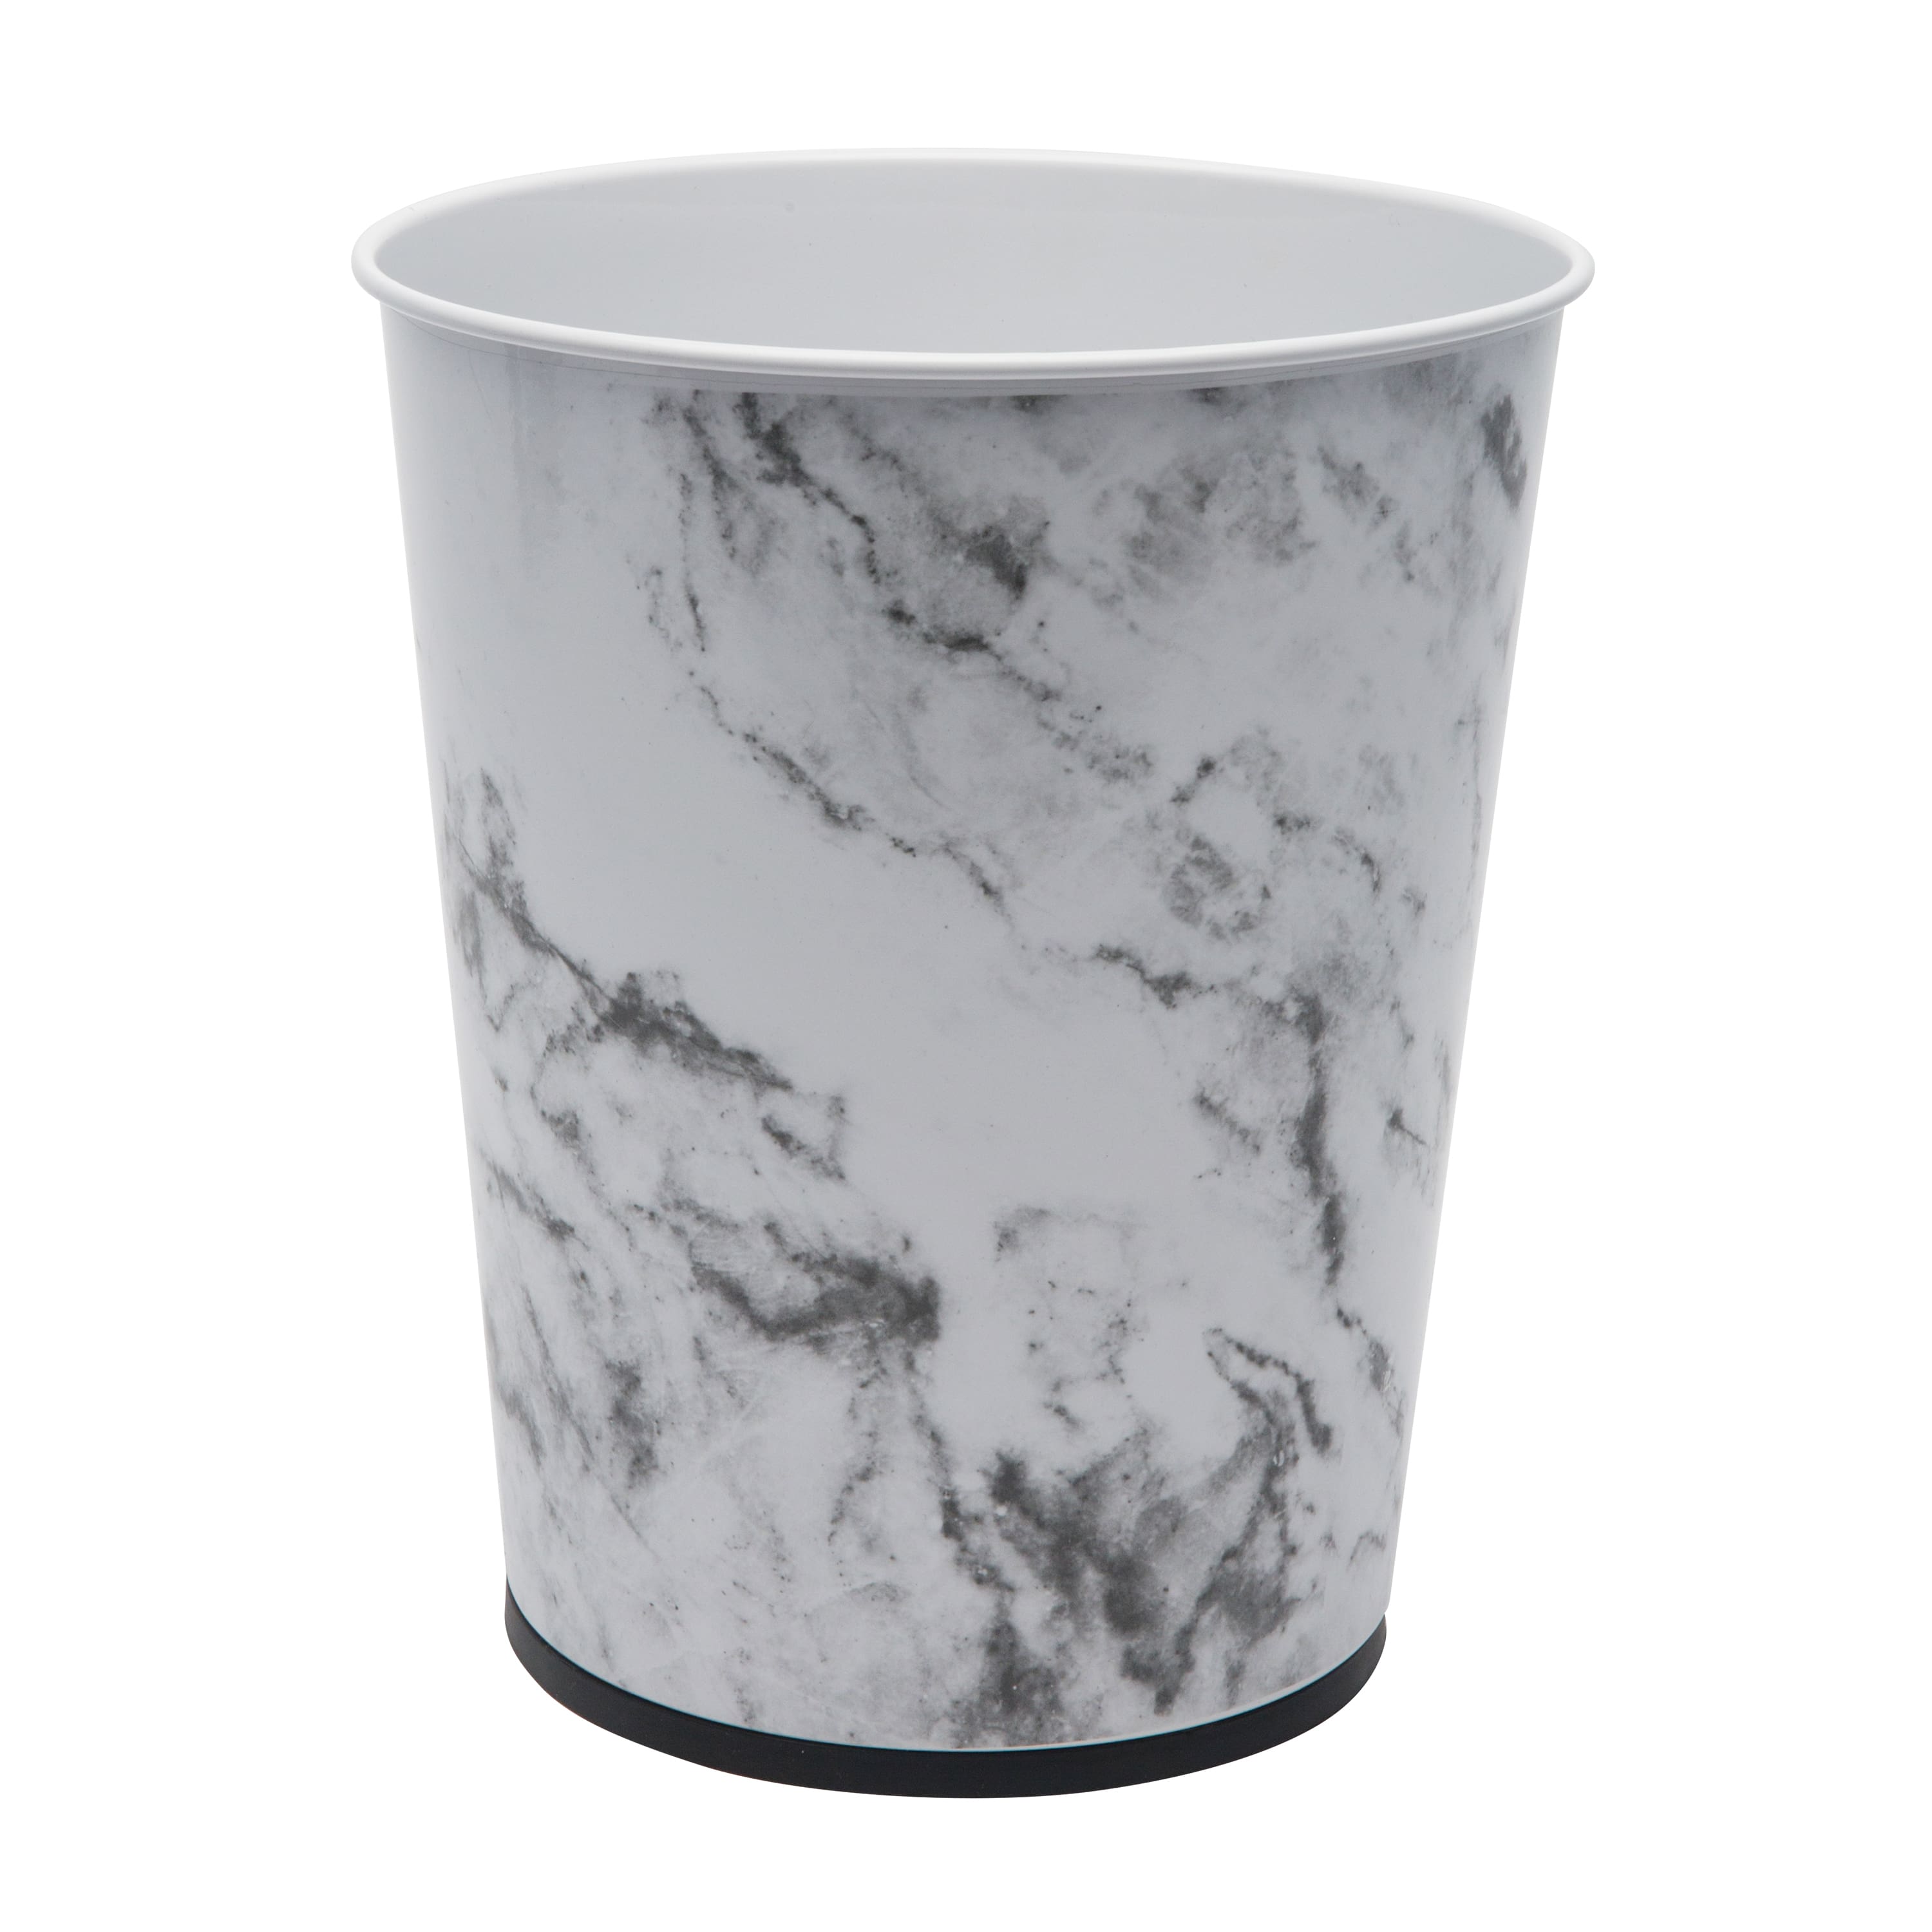 Bath Bliss Marble Stainless Steel Trash Can